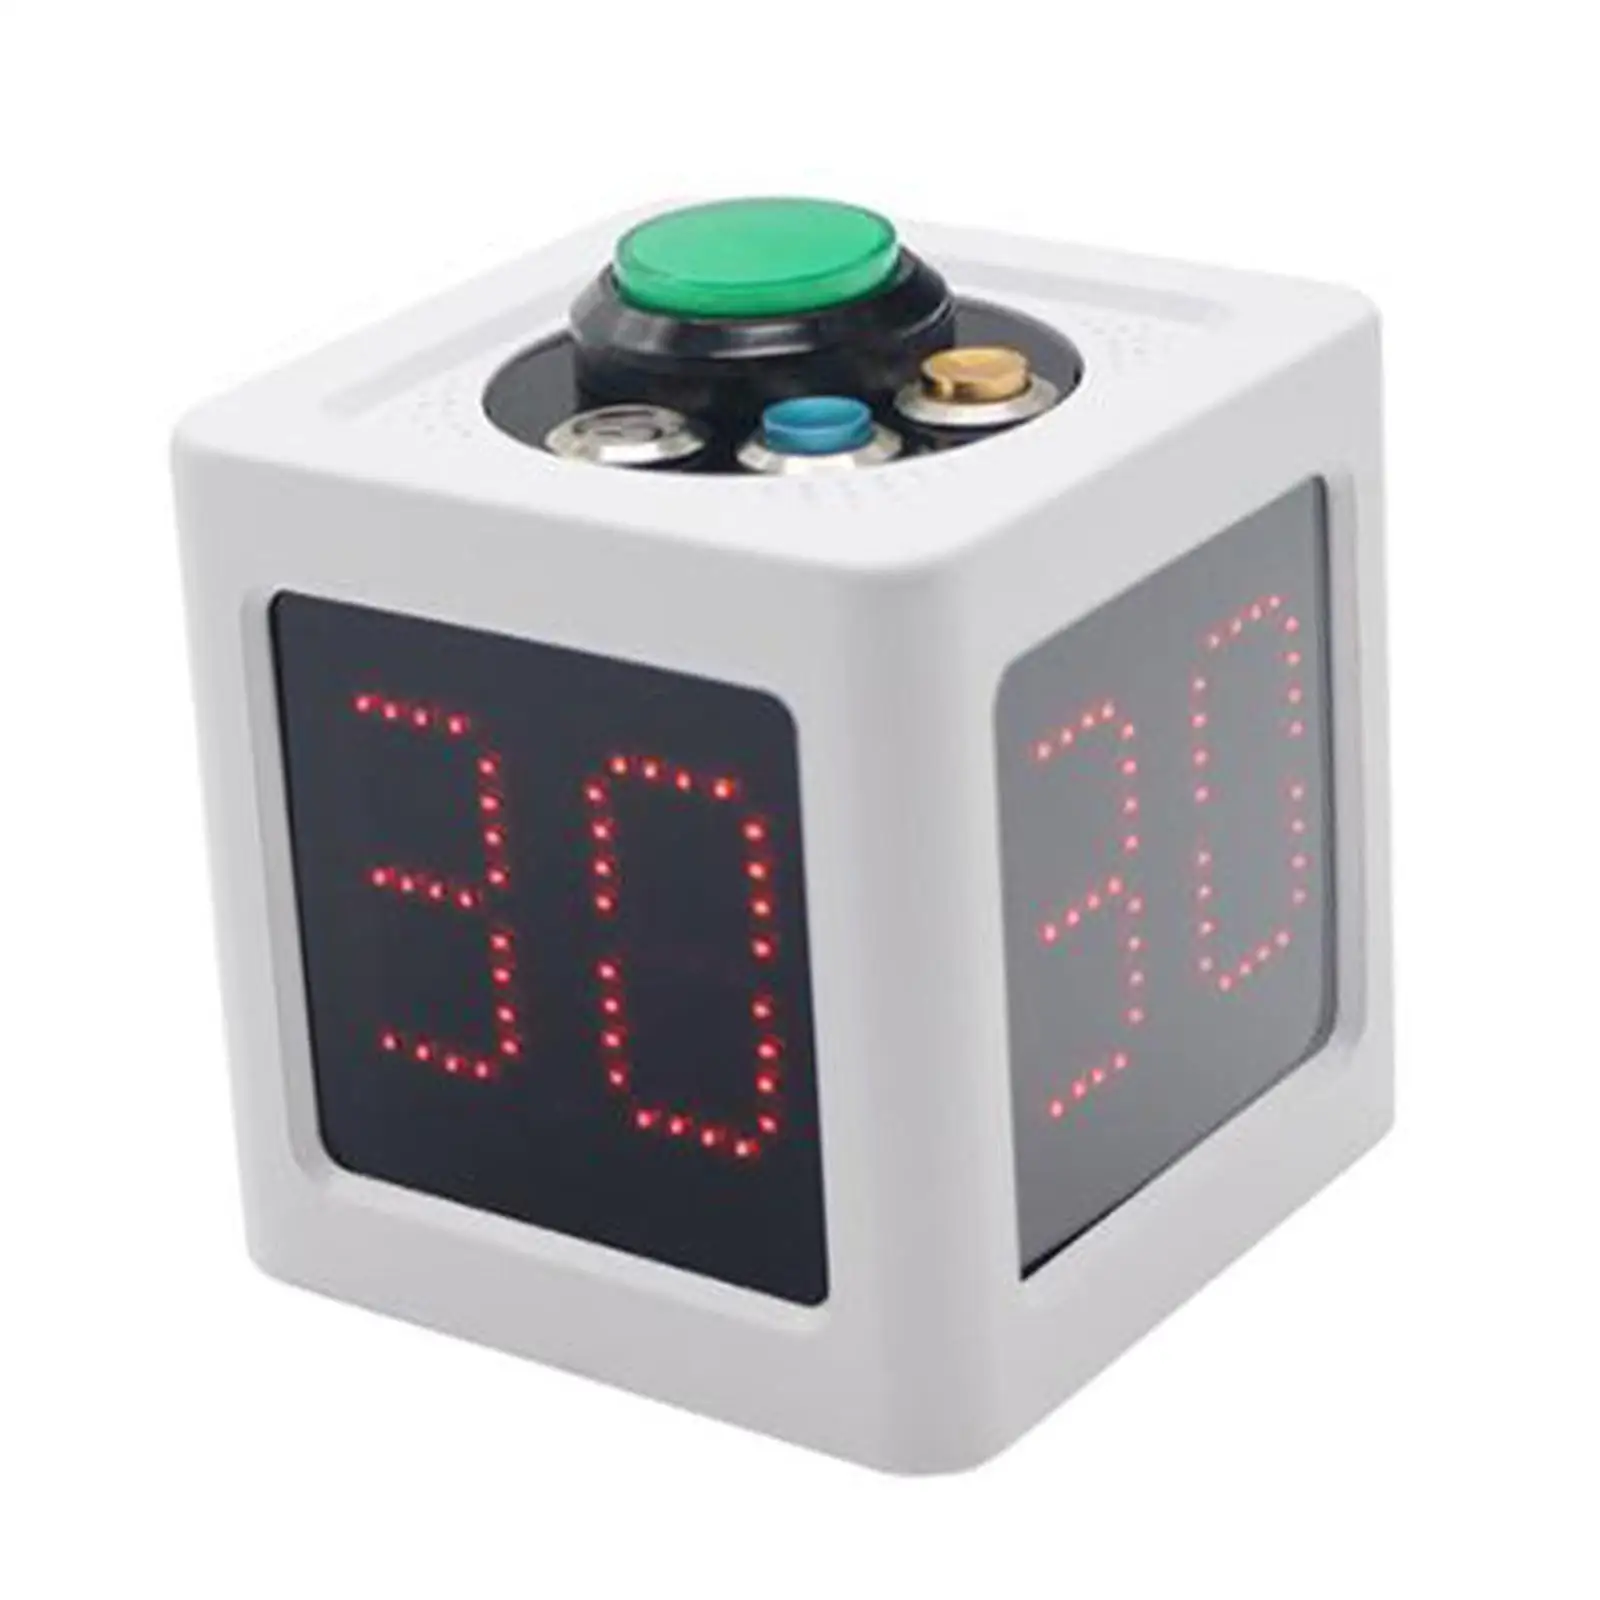 Chess Clock Timer Digital Professional Game Timer Portable Board Games Timer for Tournament Player Sports Mahjong Competition